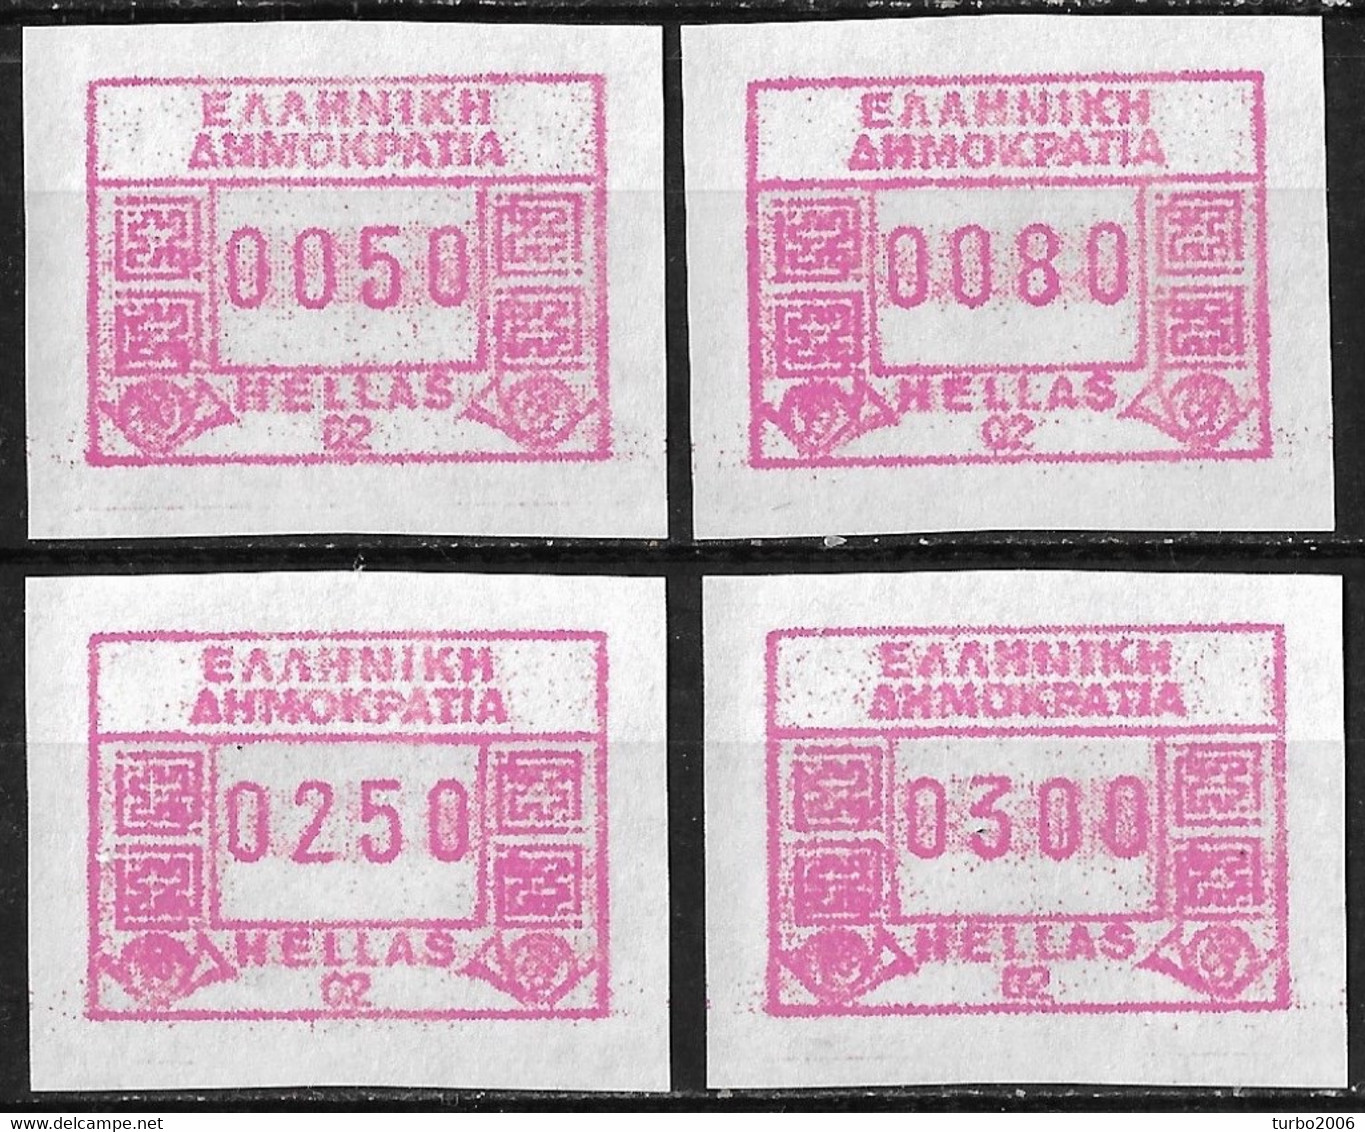 GREECE 1991 FRAMA Stamps 02 Athens East (international) Airport Set Of 50-80-250-300 D MNH Hellas M 19 - Automatenmarken [ATM]